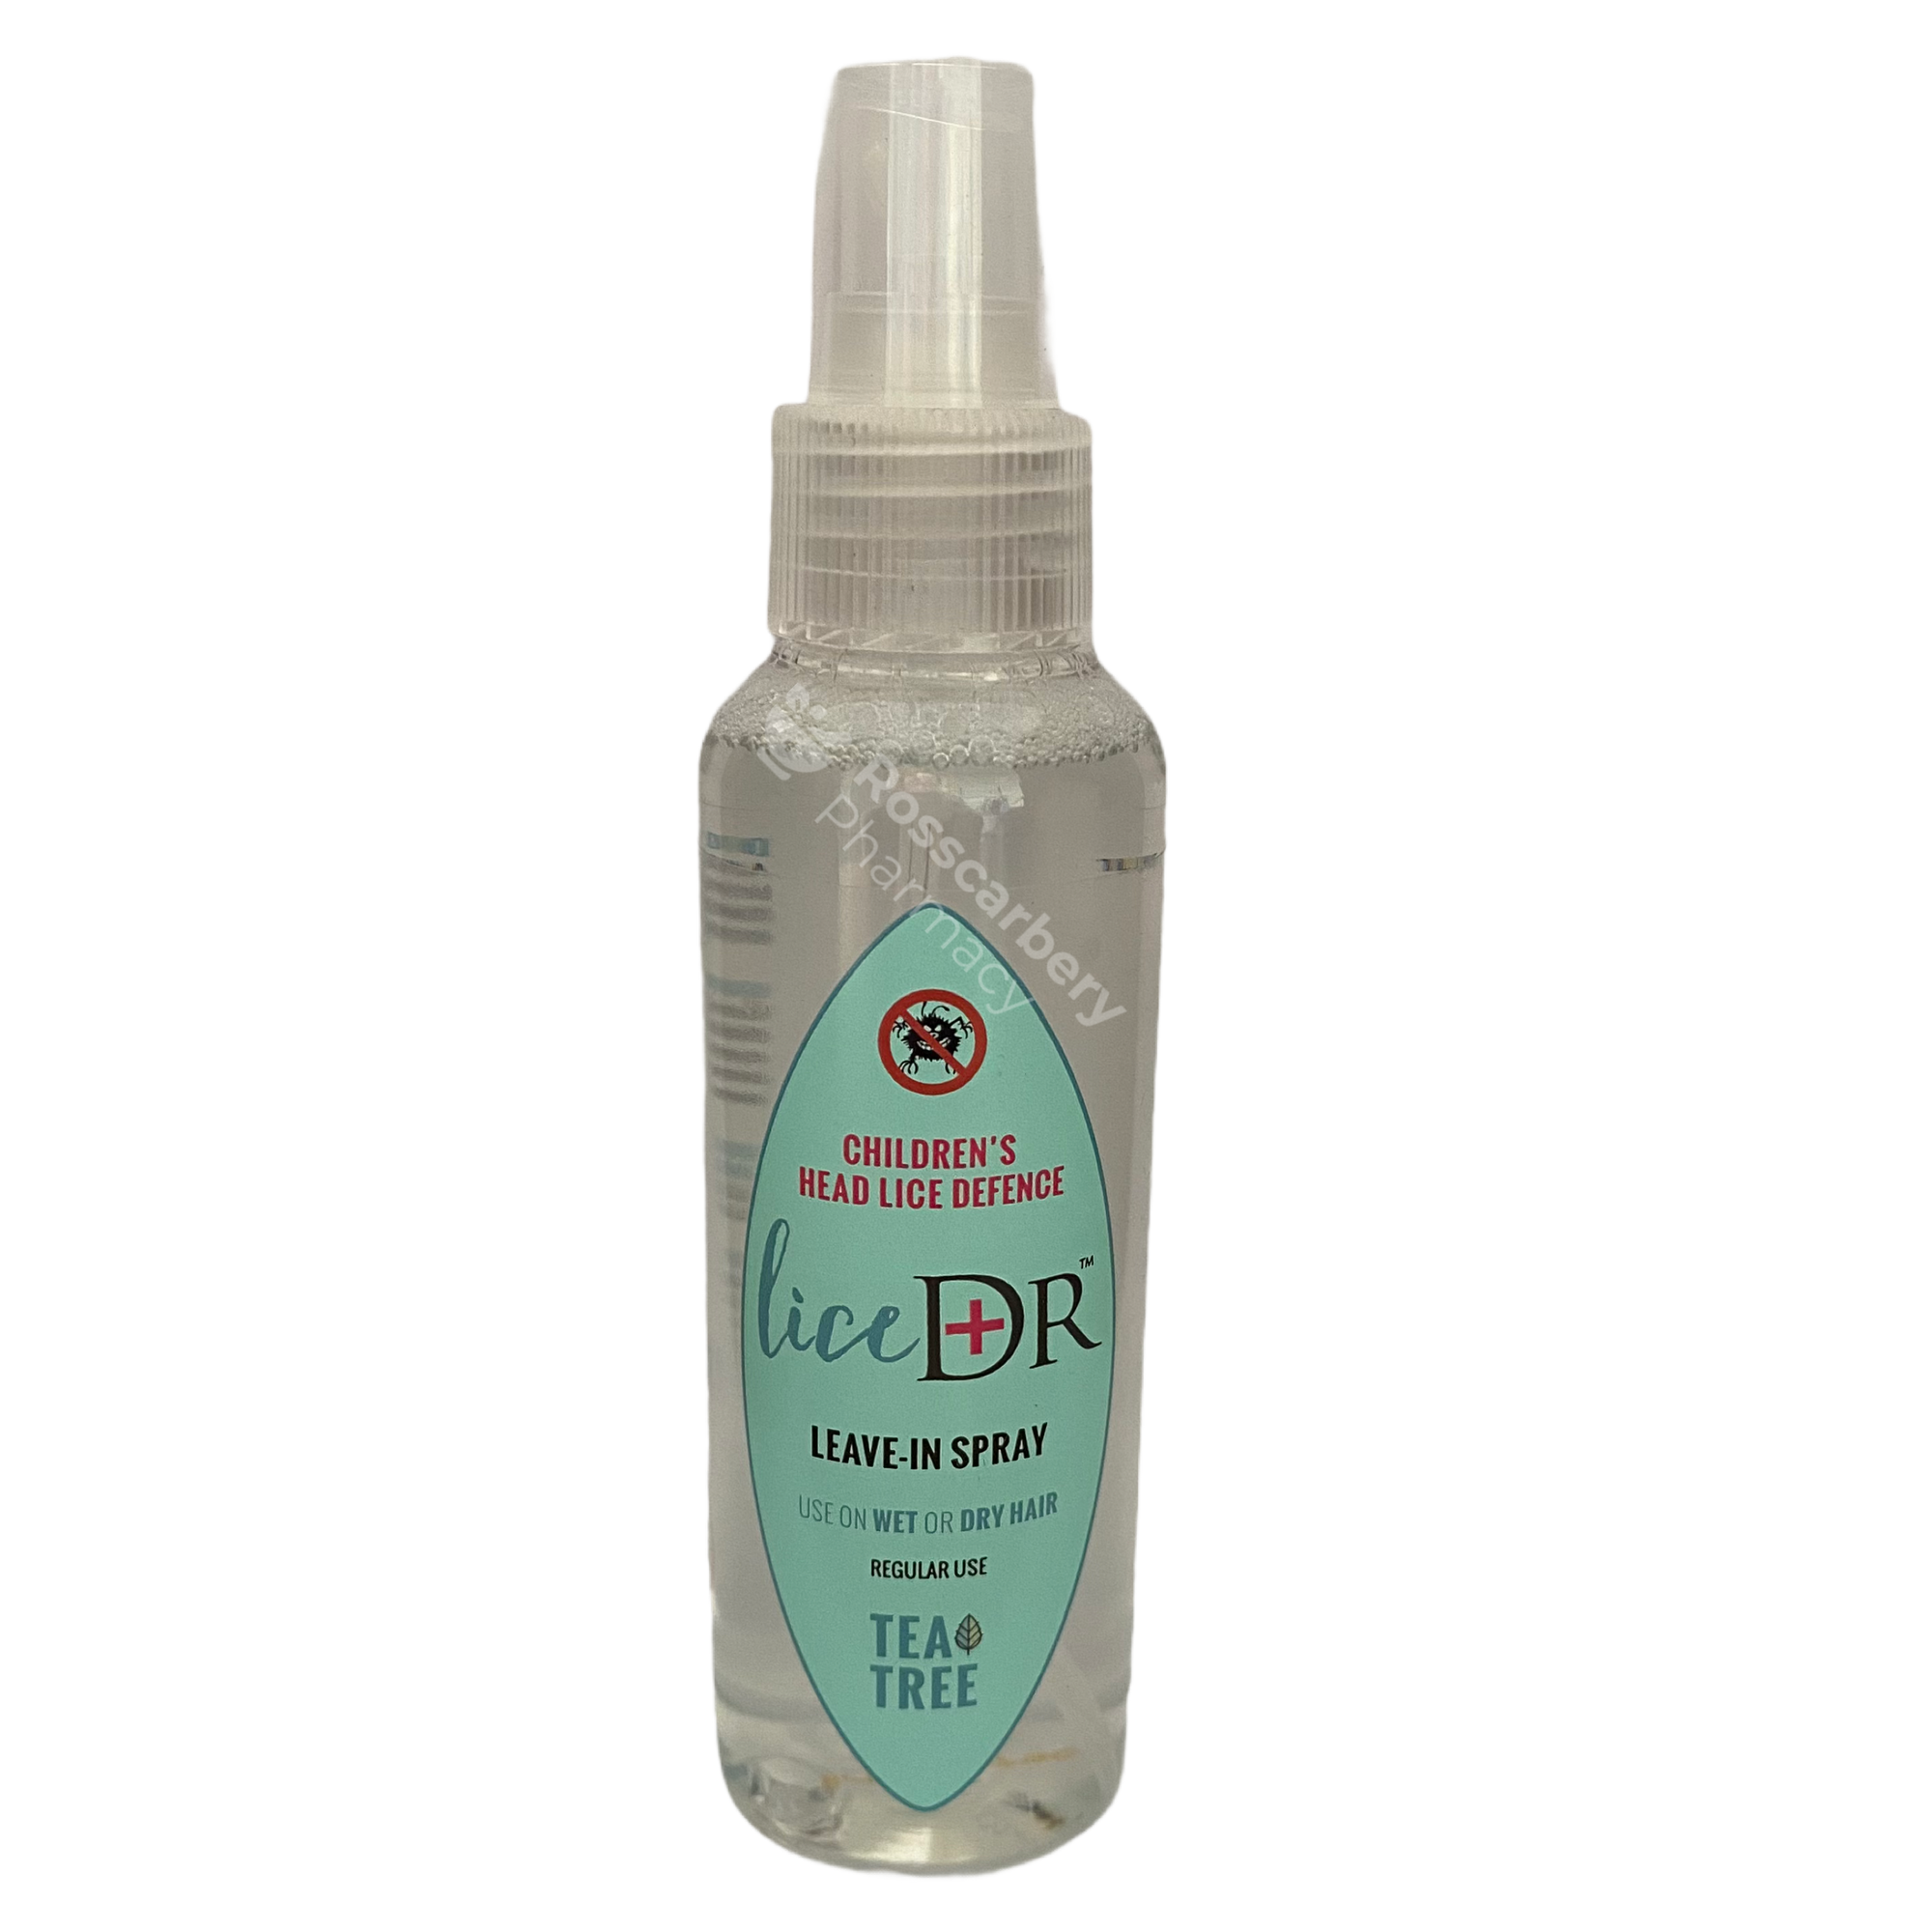 Lice Dr - Children's Head Lice Defence Leave-In Spray